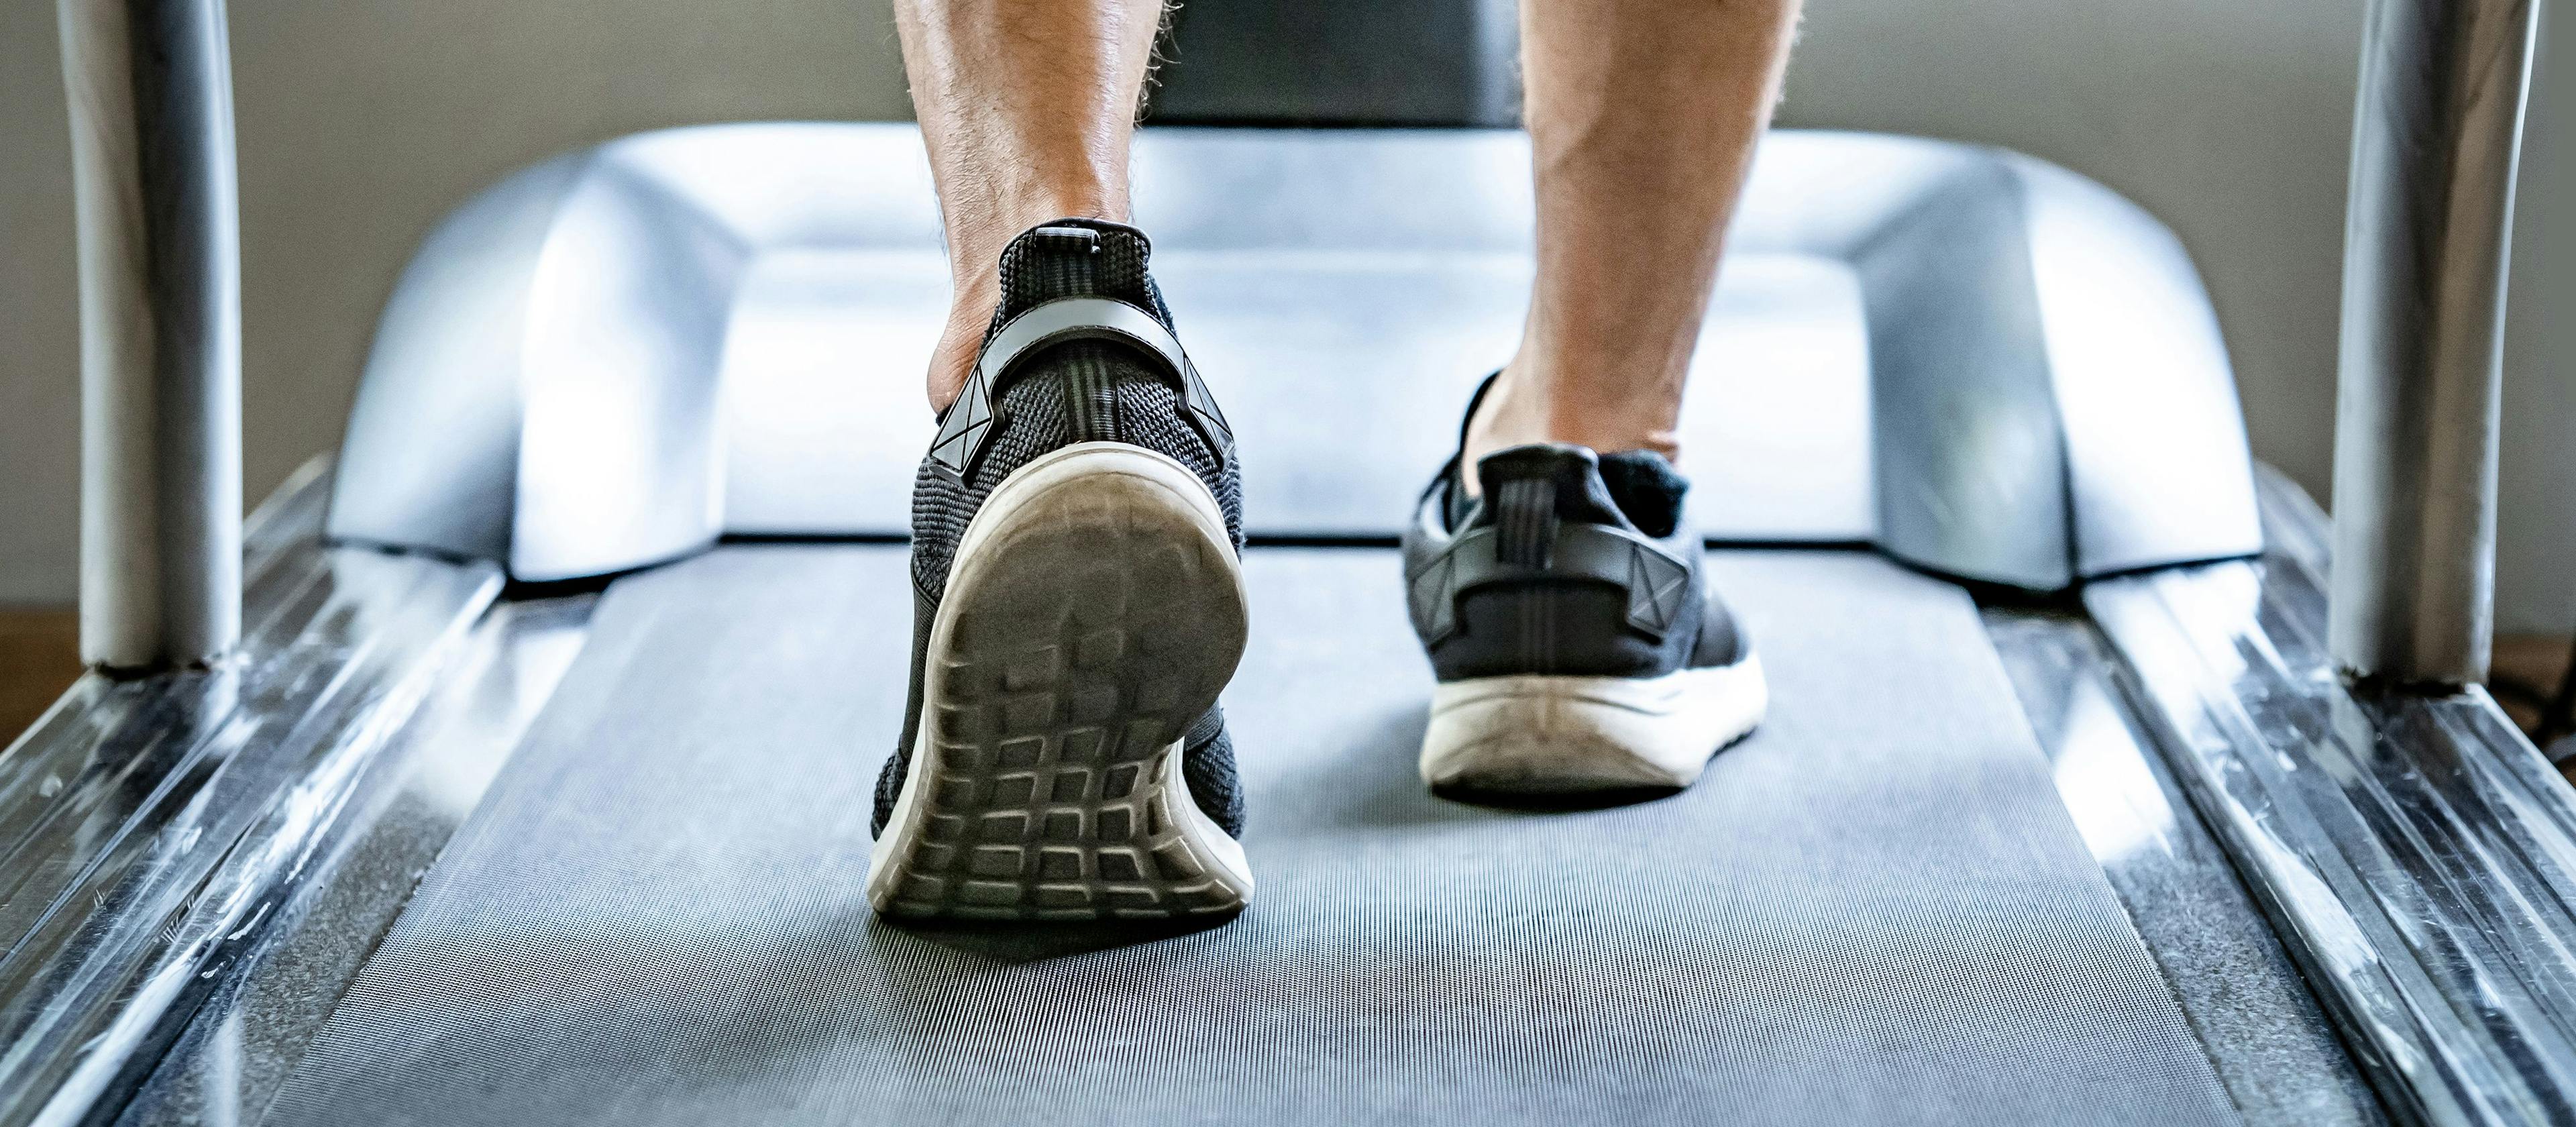 Close up of male feet in sneakers or sport footwear running on treadmill in fitness gym. Indoor cardio workout machine | Image credit: Summer Paradive - stock.adobe.com